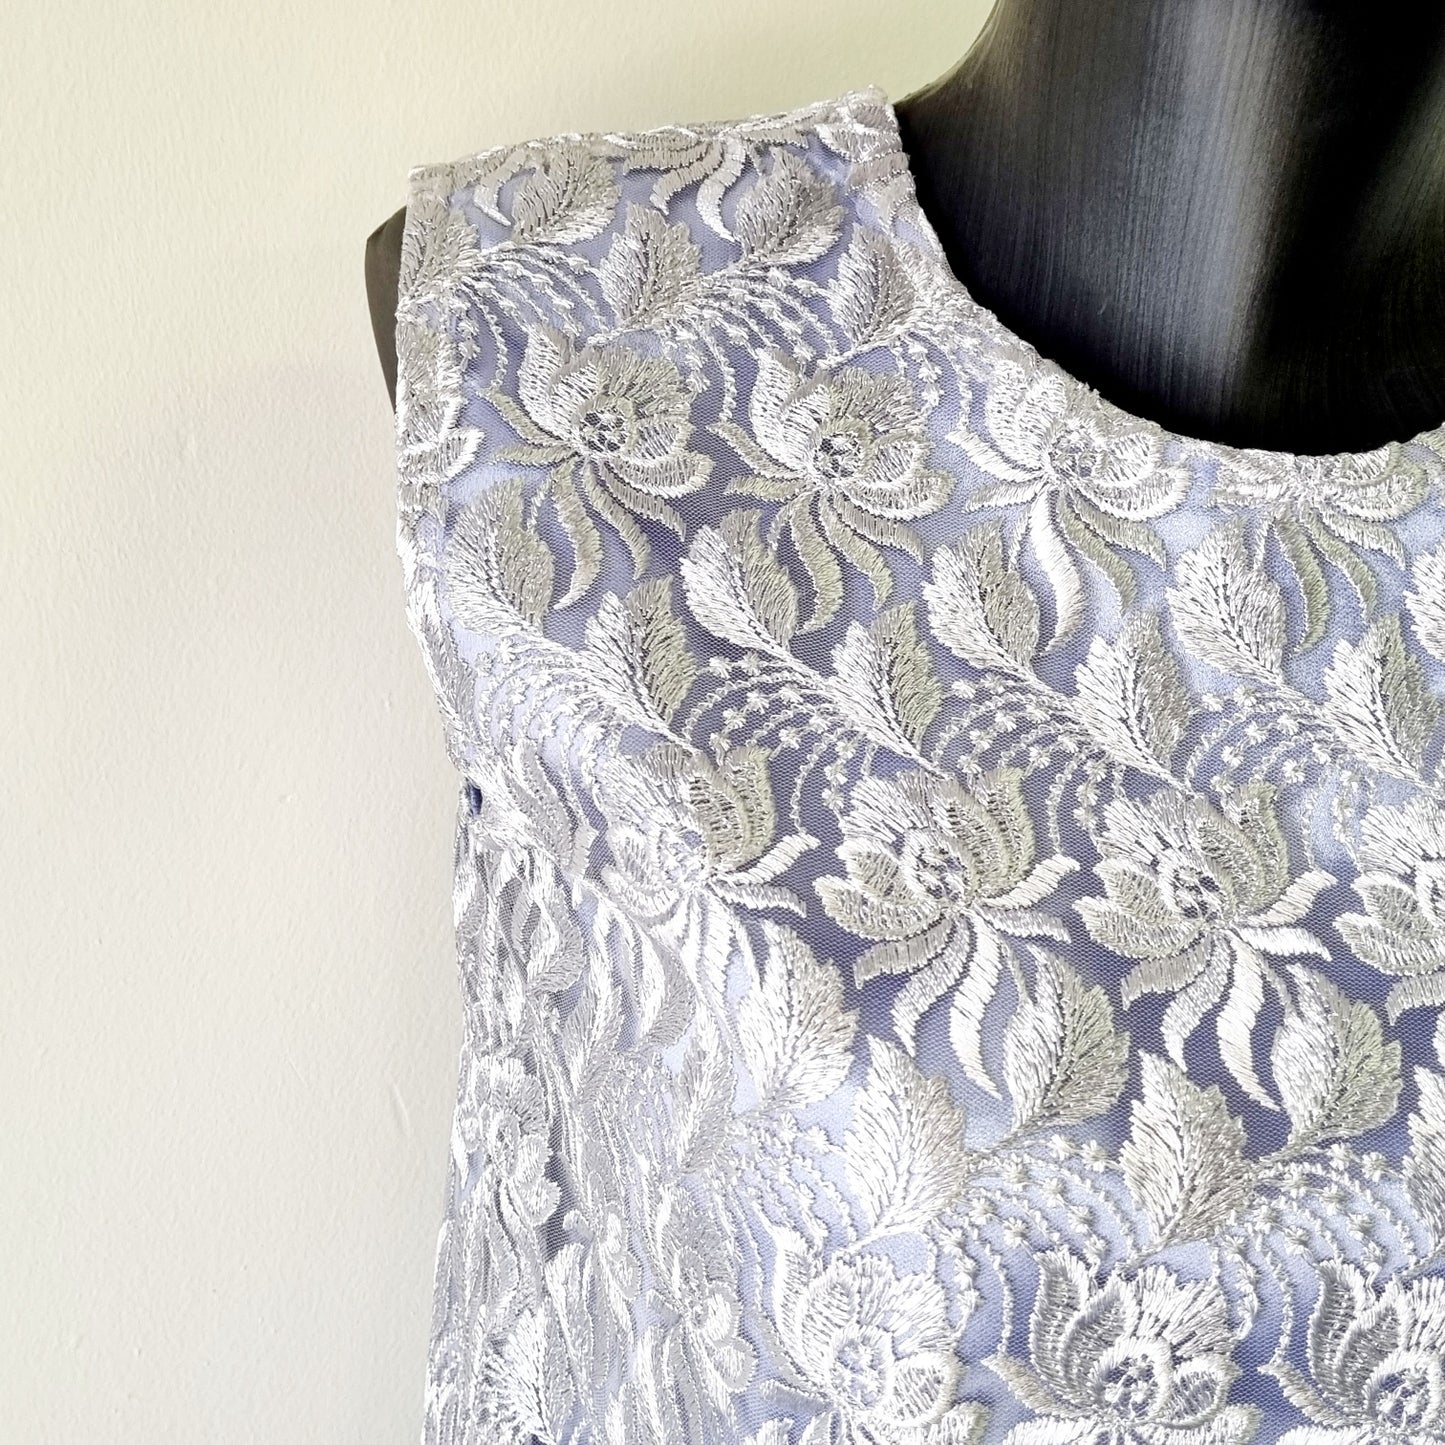 Hand Sewn - Mauve lace lined vintage sleeveless top.